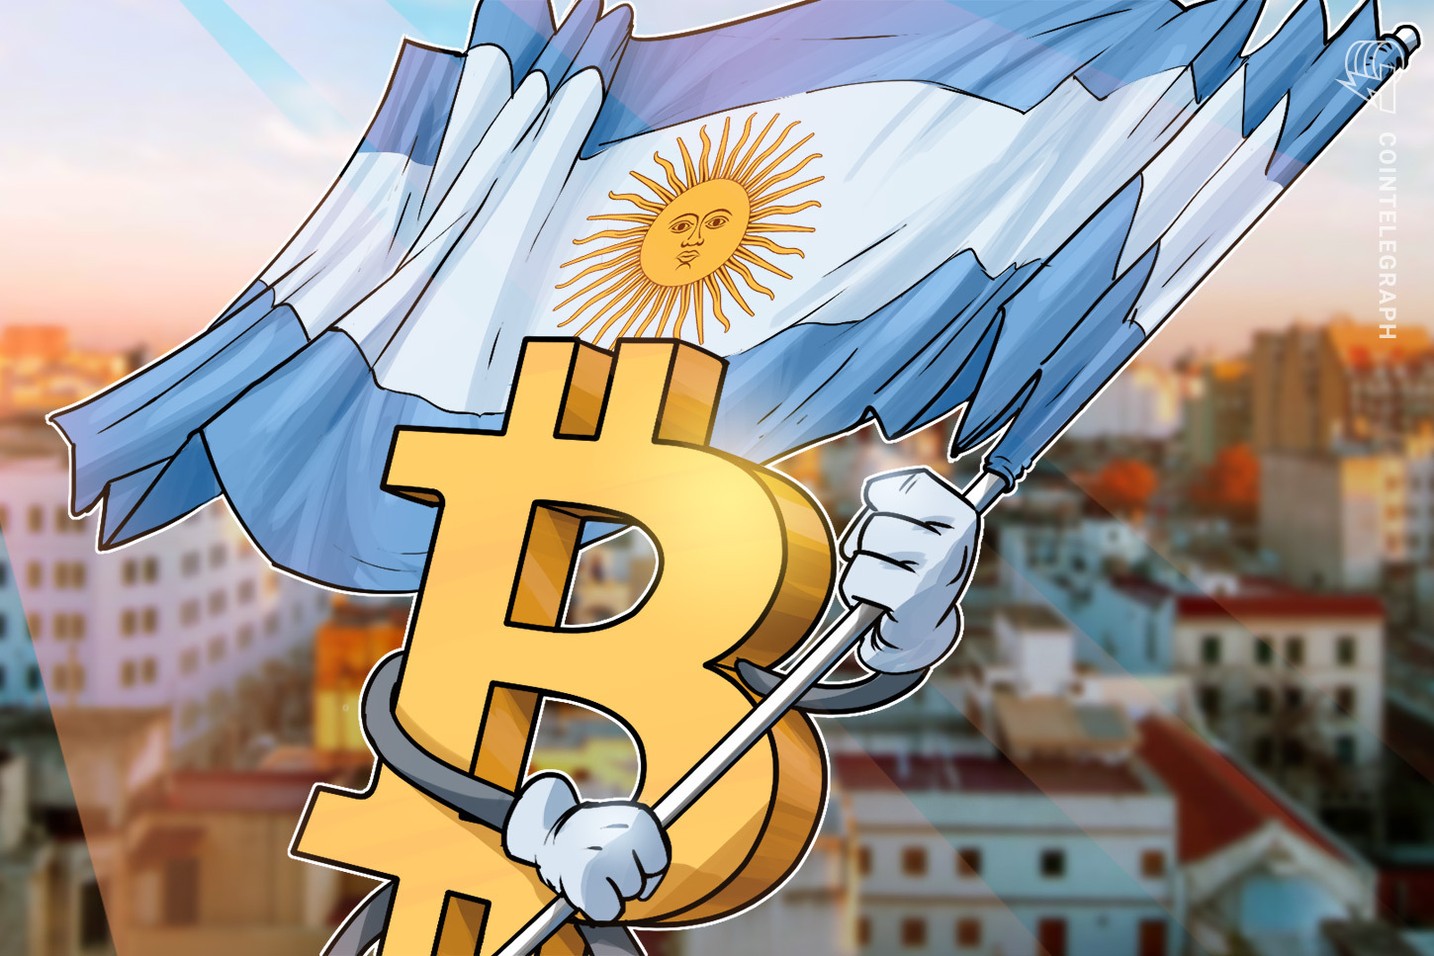 Argentina's newly elected president, Javier Milei, embraces Bitcoin-friendly policies